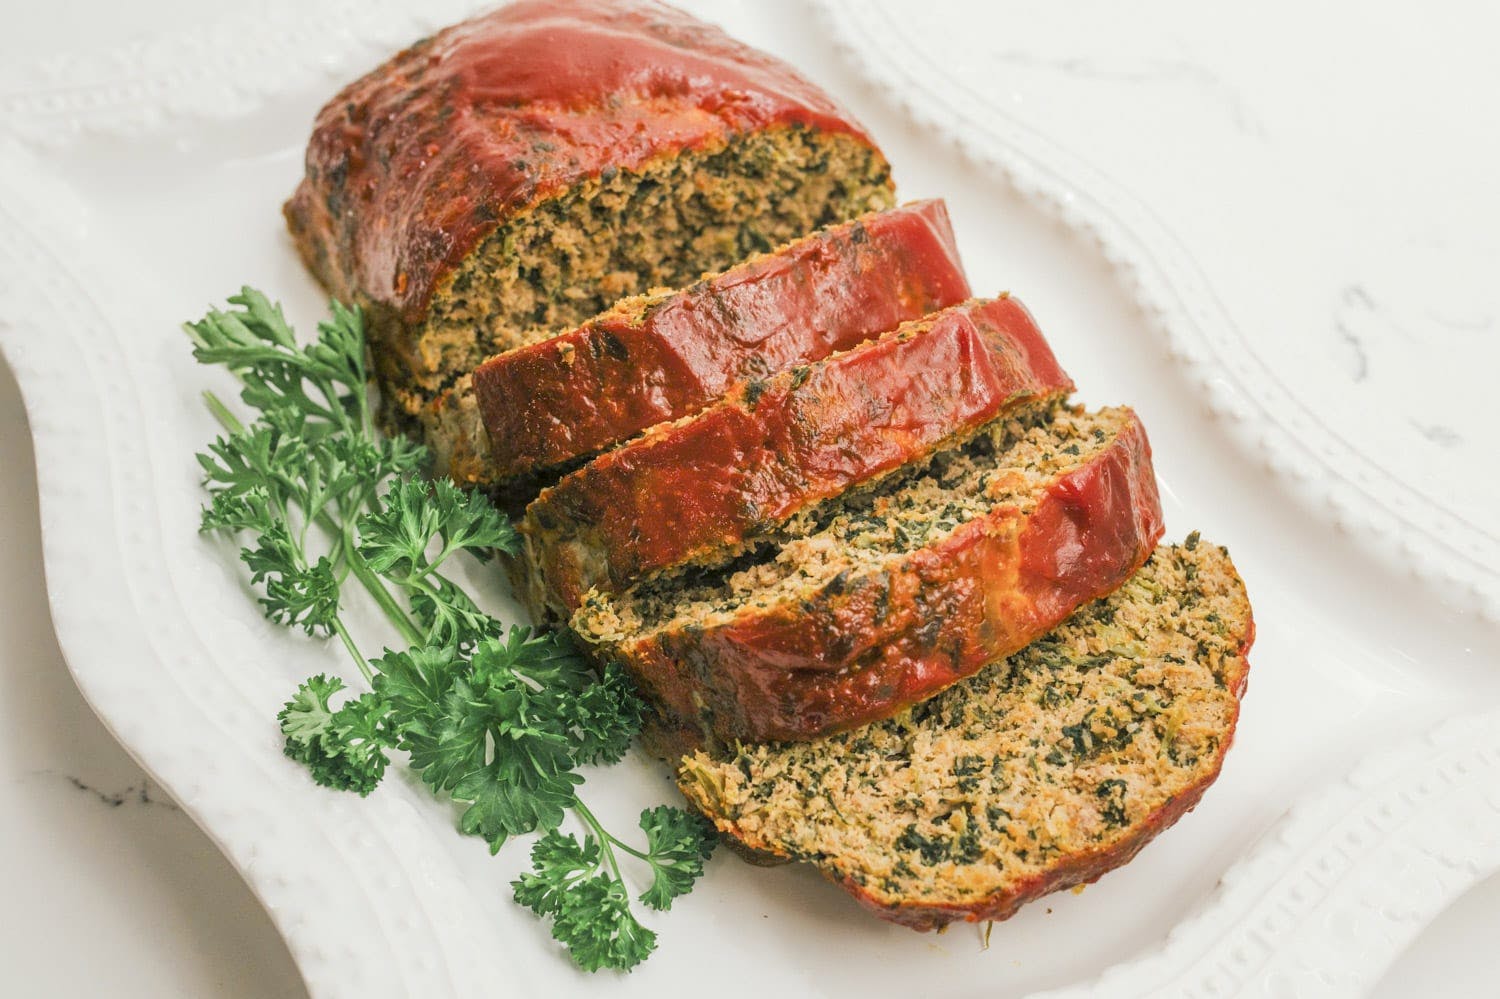 The Holly Furtick recipe: 'Skinny Turkey Meatloaf'